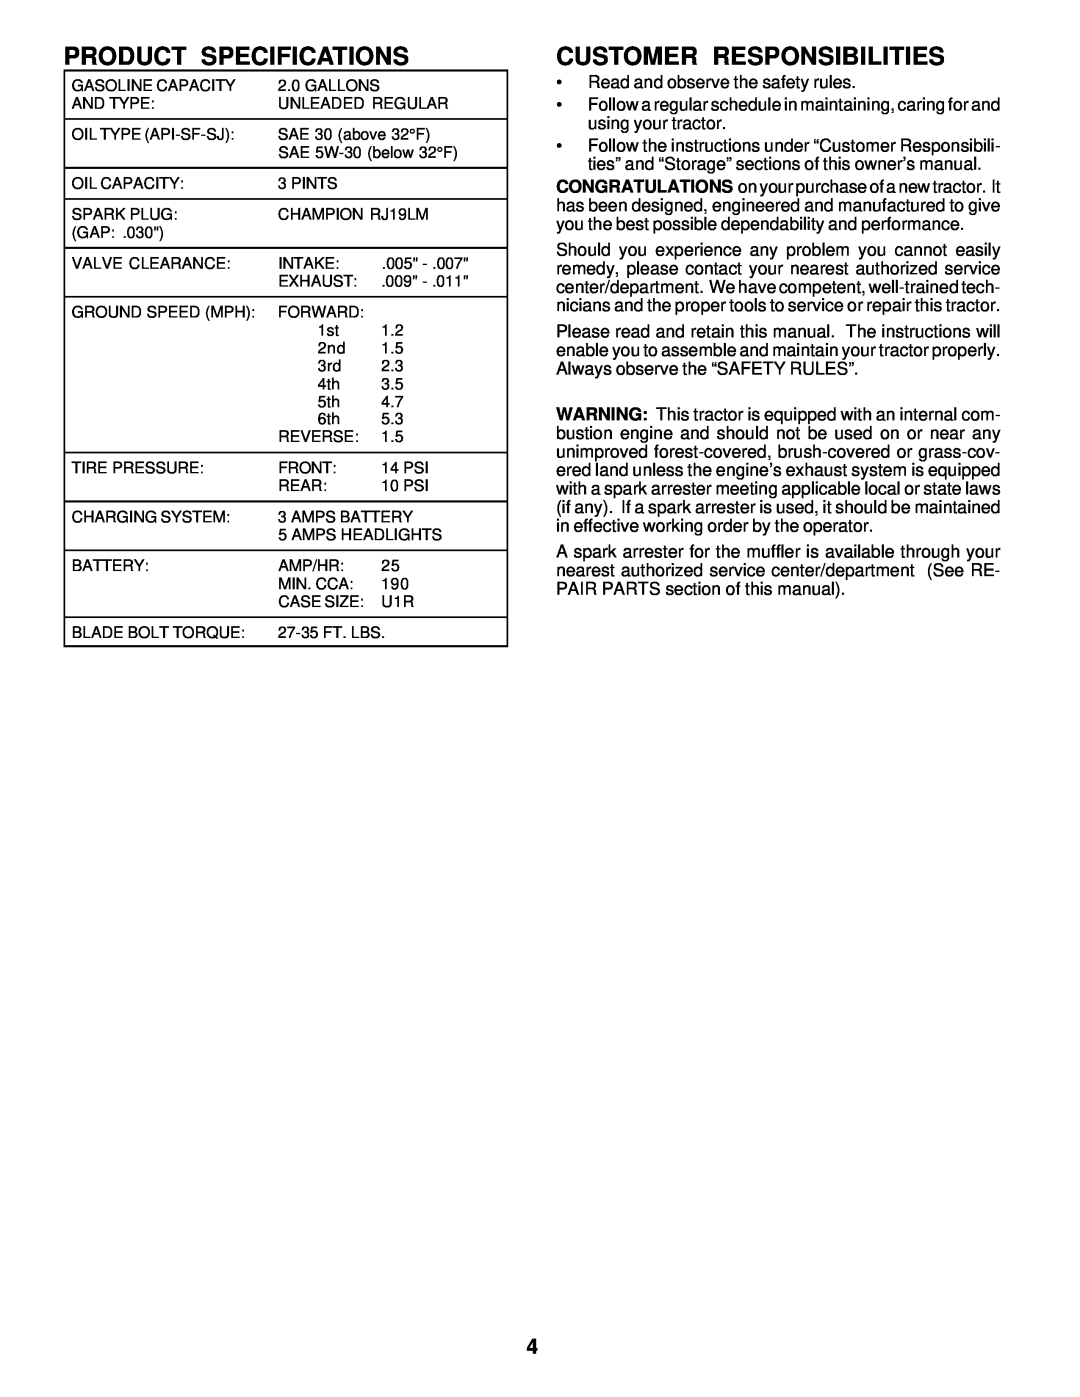 Weed Eater 177677 owner manual Product Specifications, Customer Responsibilities 